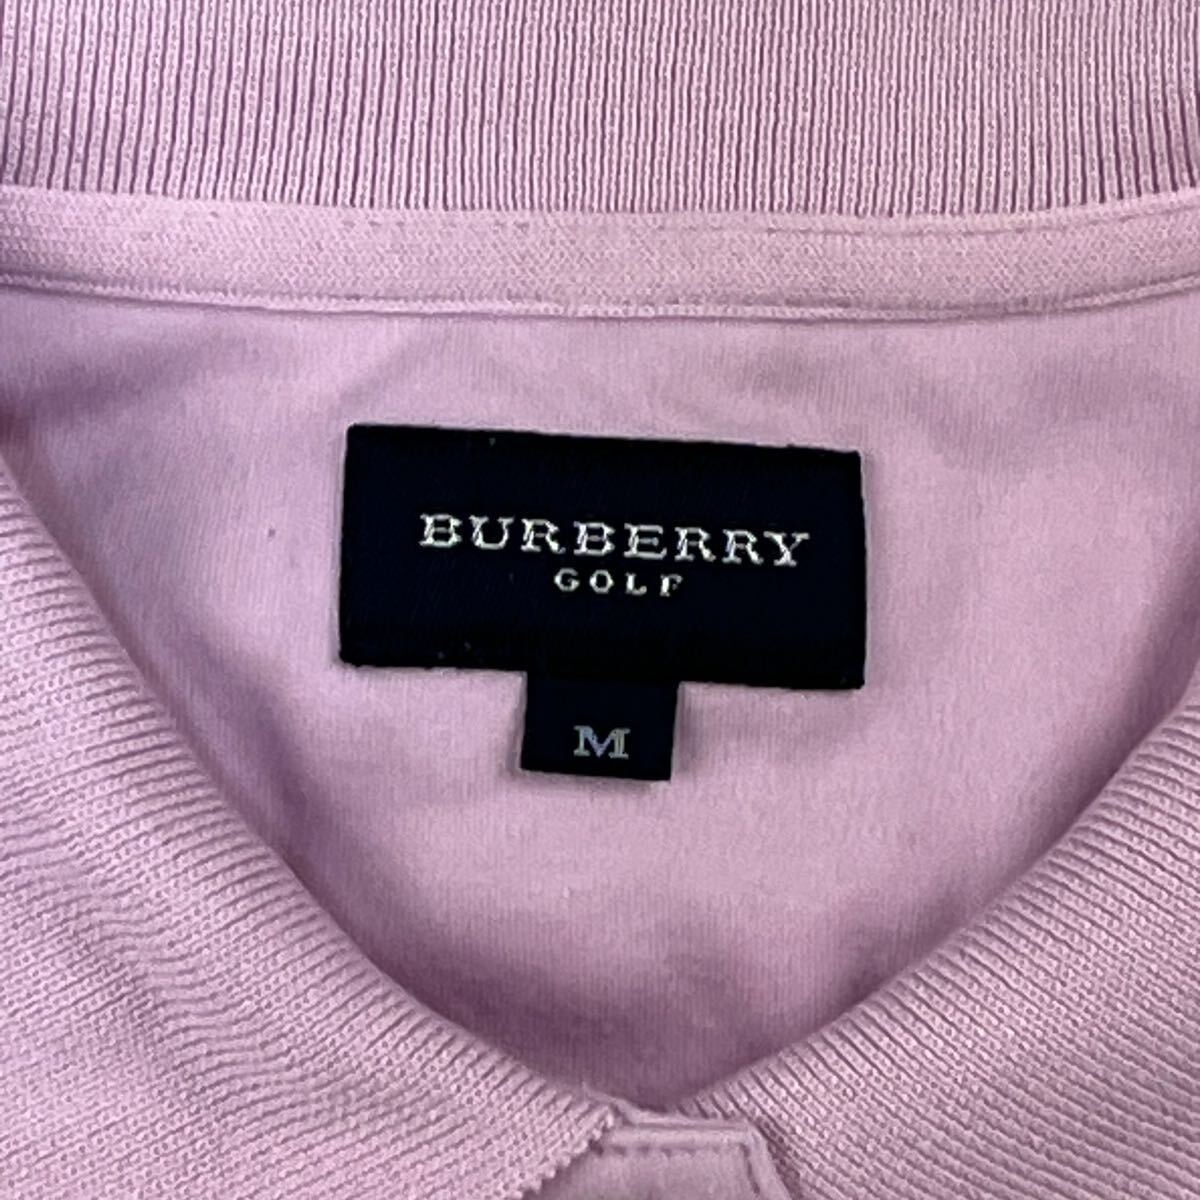 BURBERRY GOLF Burberry Golf Golf wear polo-shirt with long sleeves cotton shirt cotton 77% stretch . Logo lady's M size made in Japan 